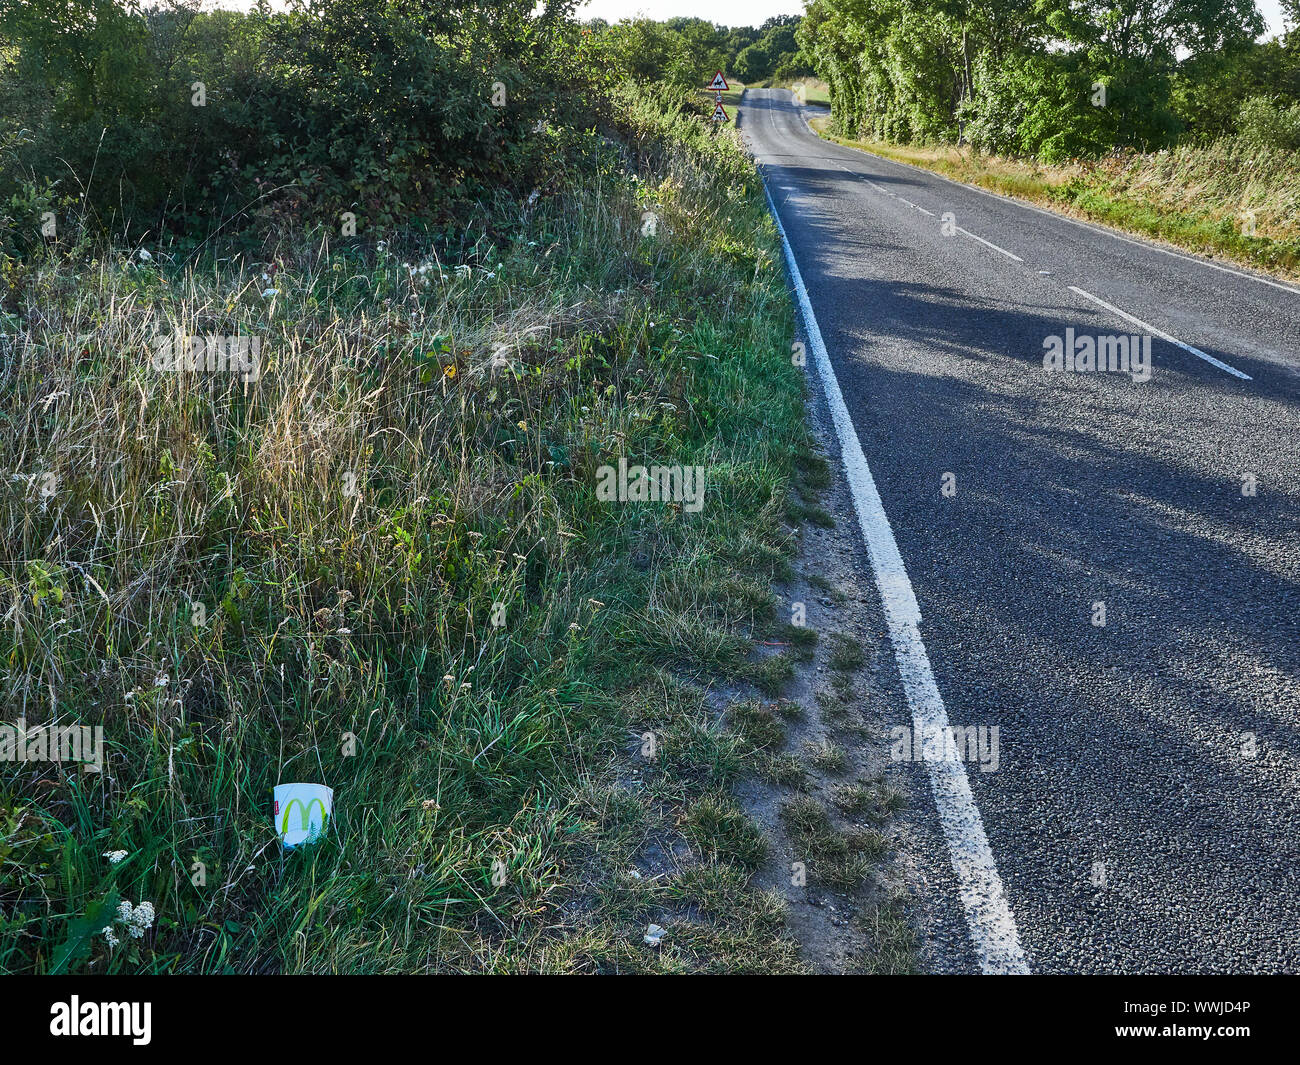 A cardboard cup that has been thrown out from a vehicle lead in the grass on the side of a main road that has no traffic on it Stock Photo